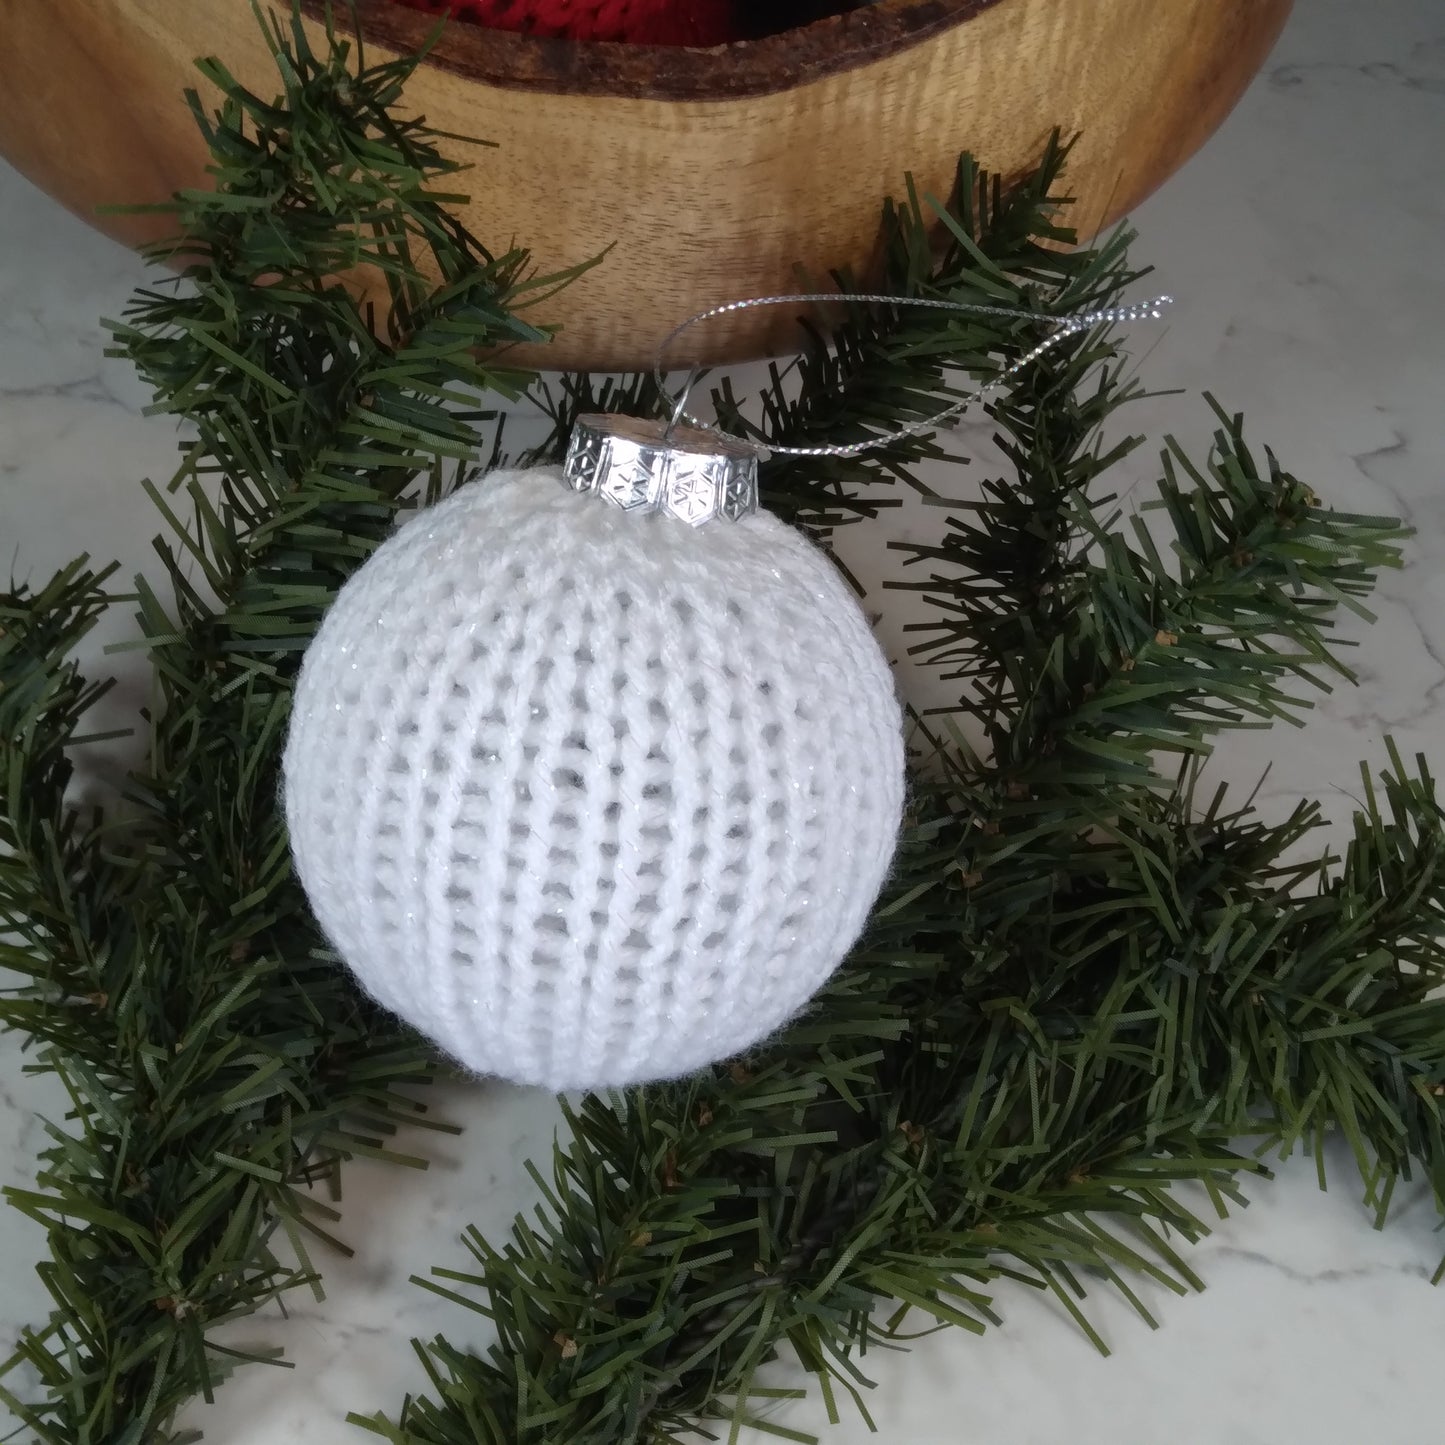 Handmade Knitted Christmas Ornaments